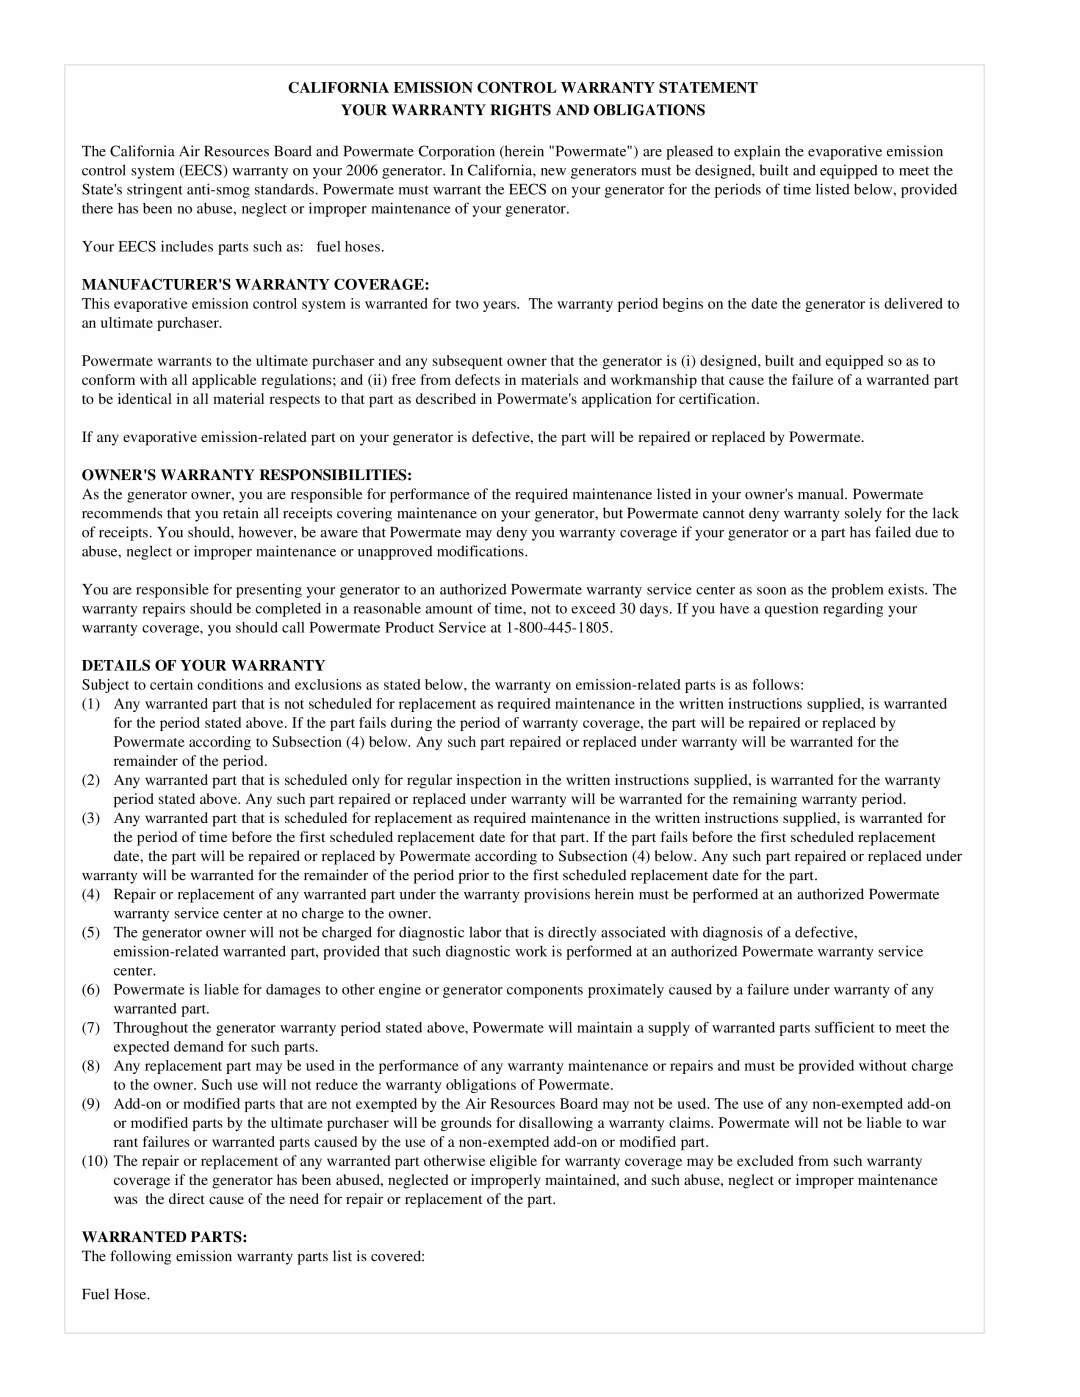 Powermate PMC525300 California Emission Control Warranty Statement, Your Warranty Rights And Obligations, Warranted Parts 